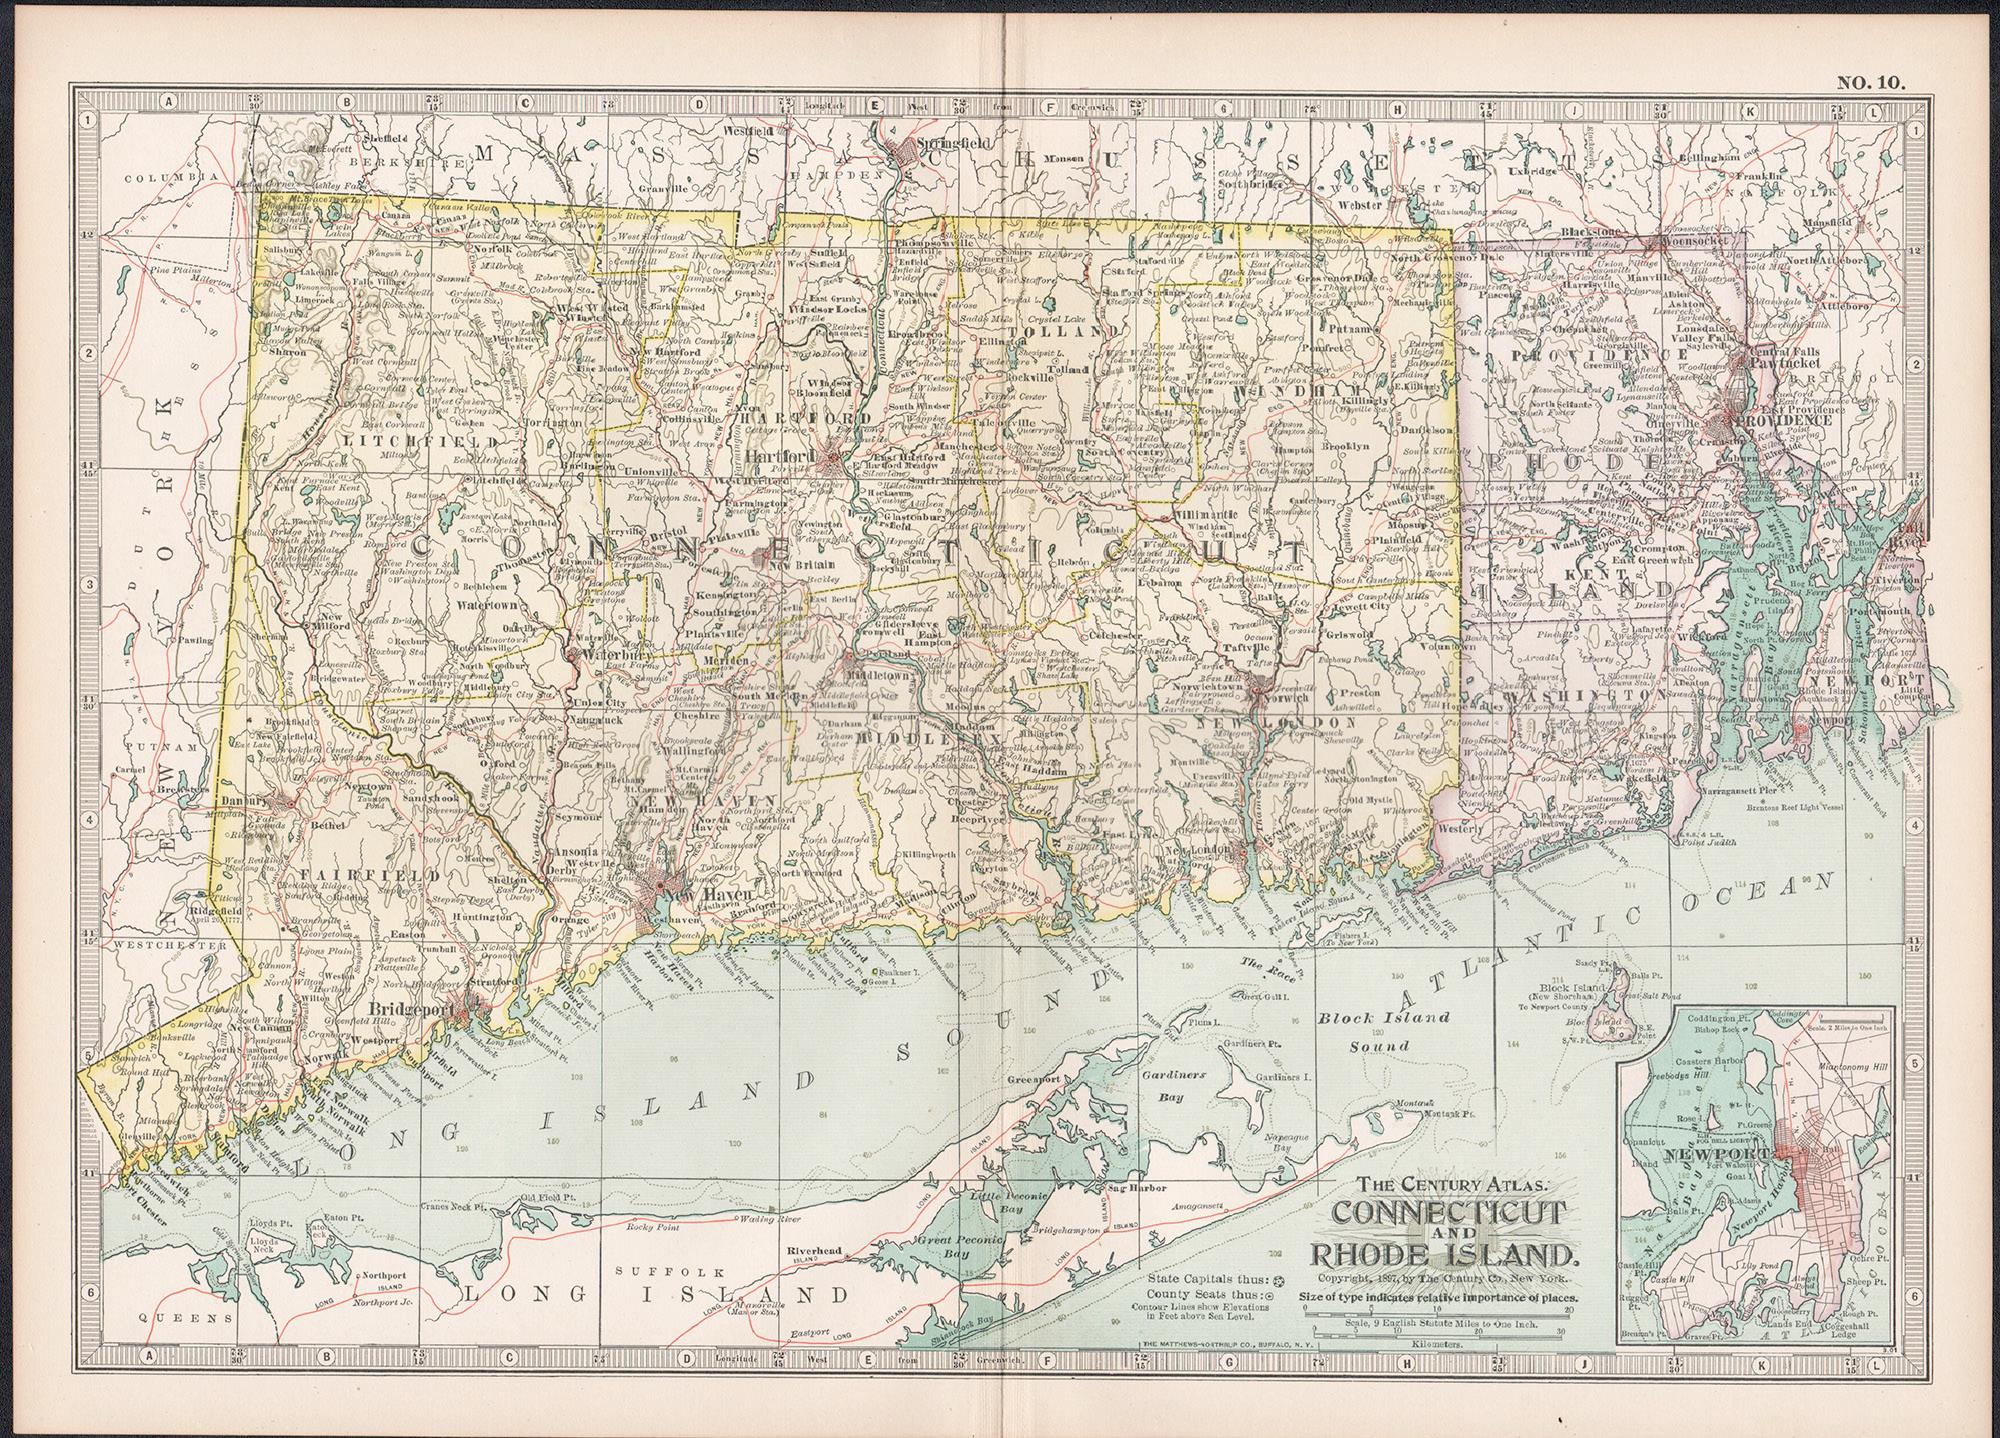 Connecticut and Rhode Island. USA. Century Atlas state antique vintage map - Print by Unknown